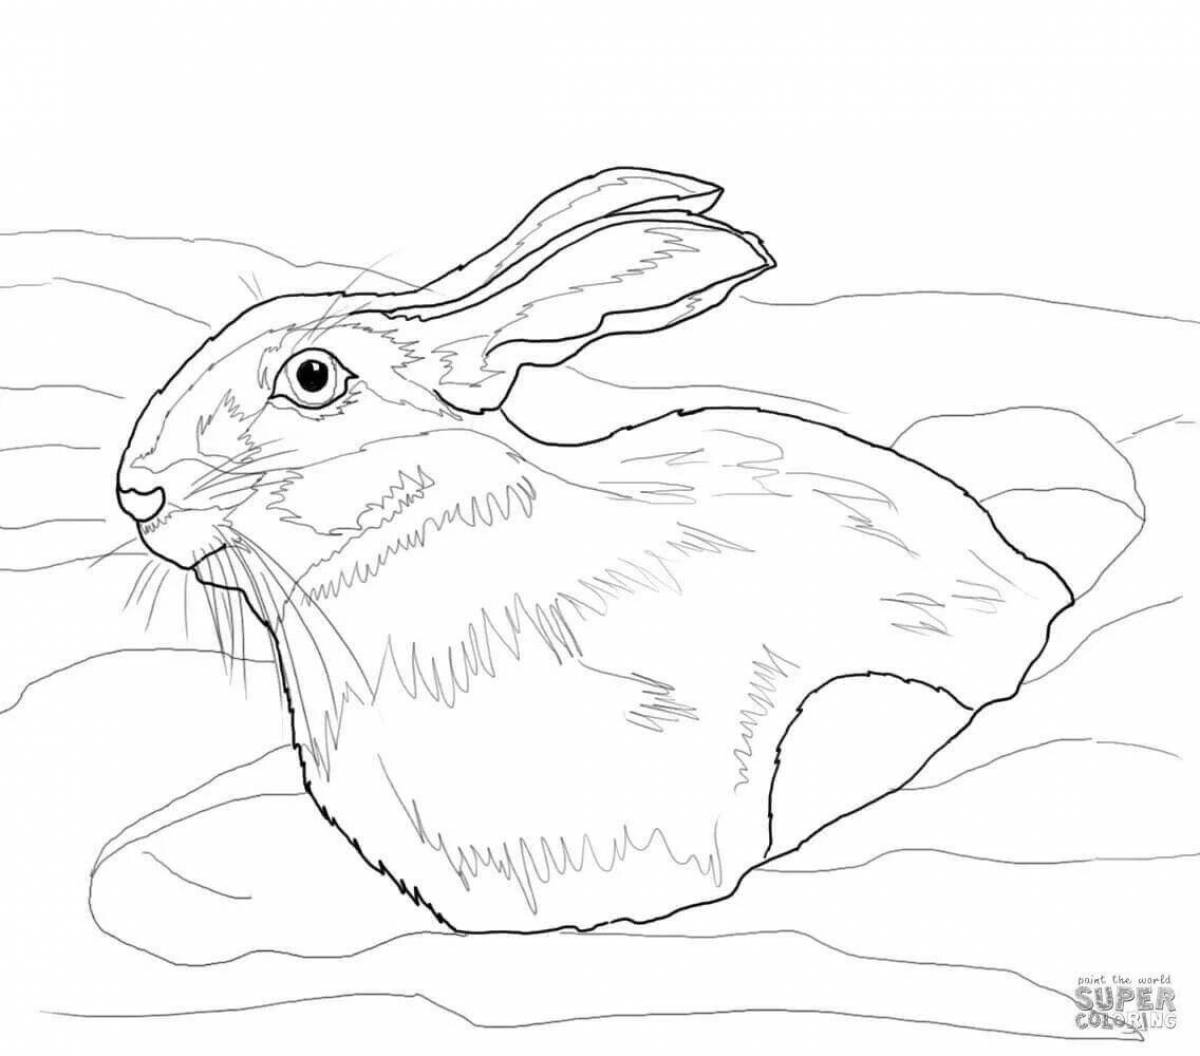 Awesome tundra animal coloring page